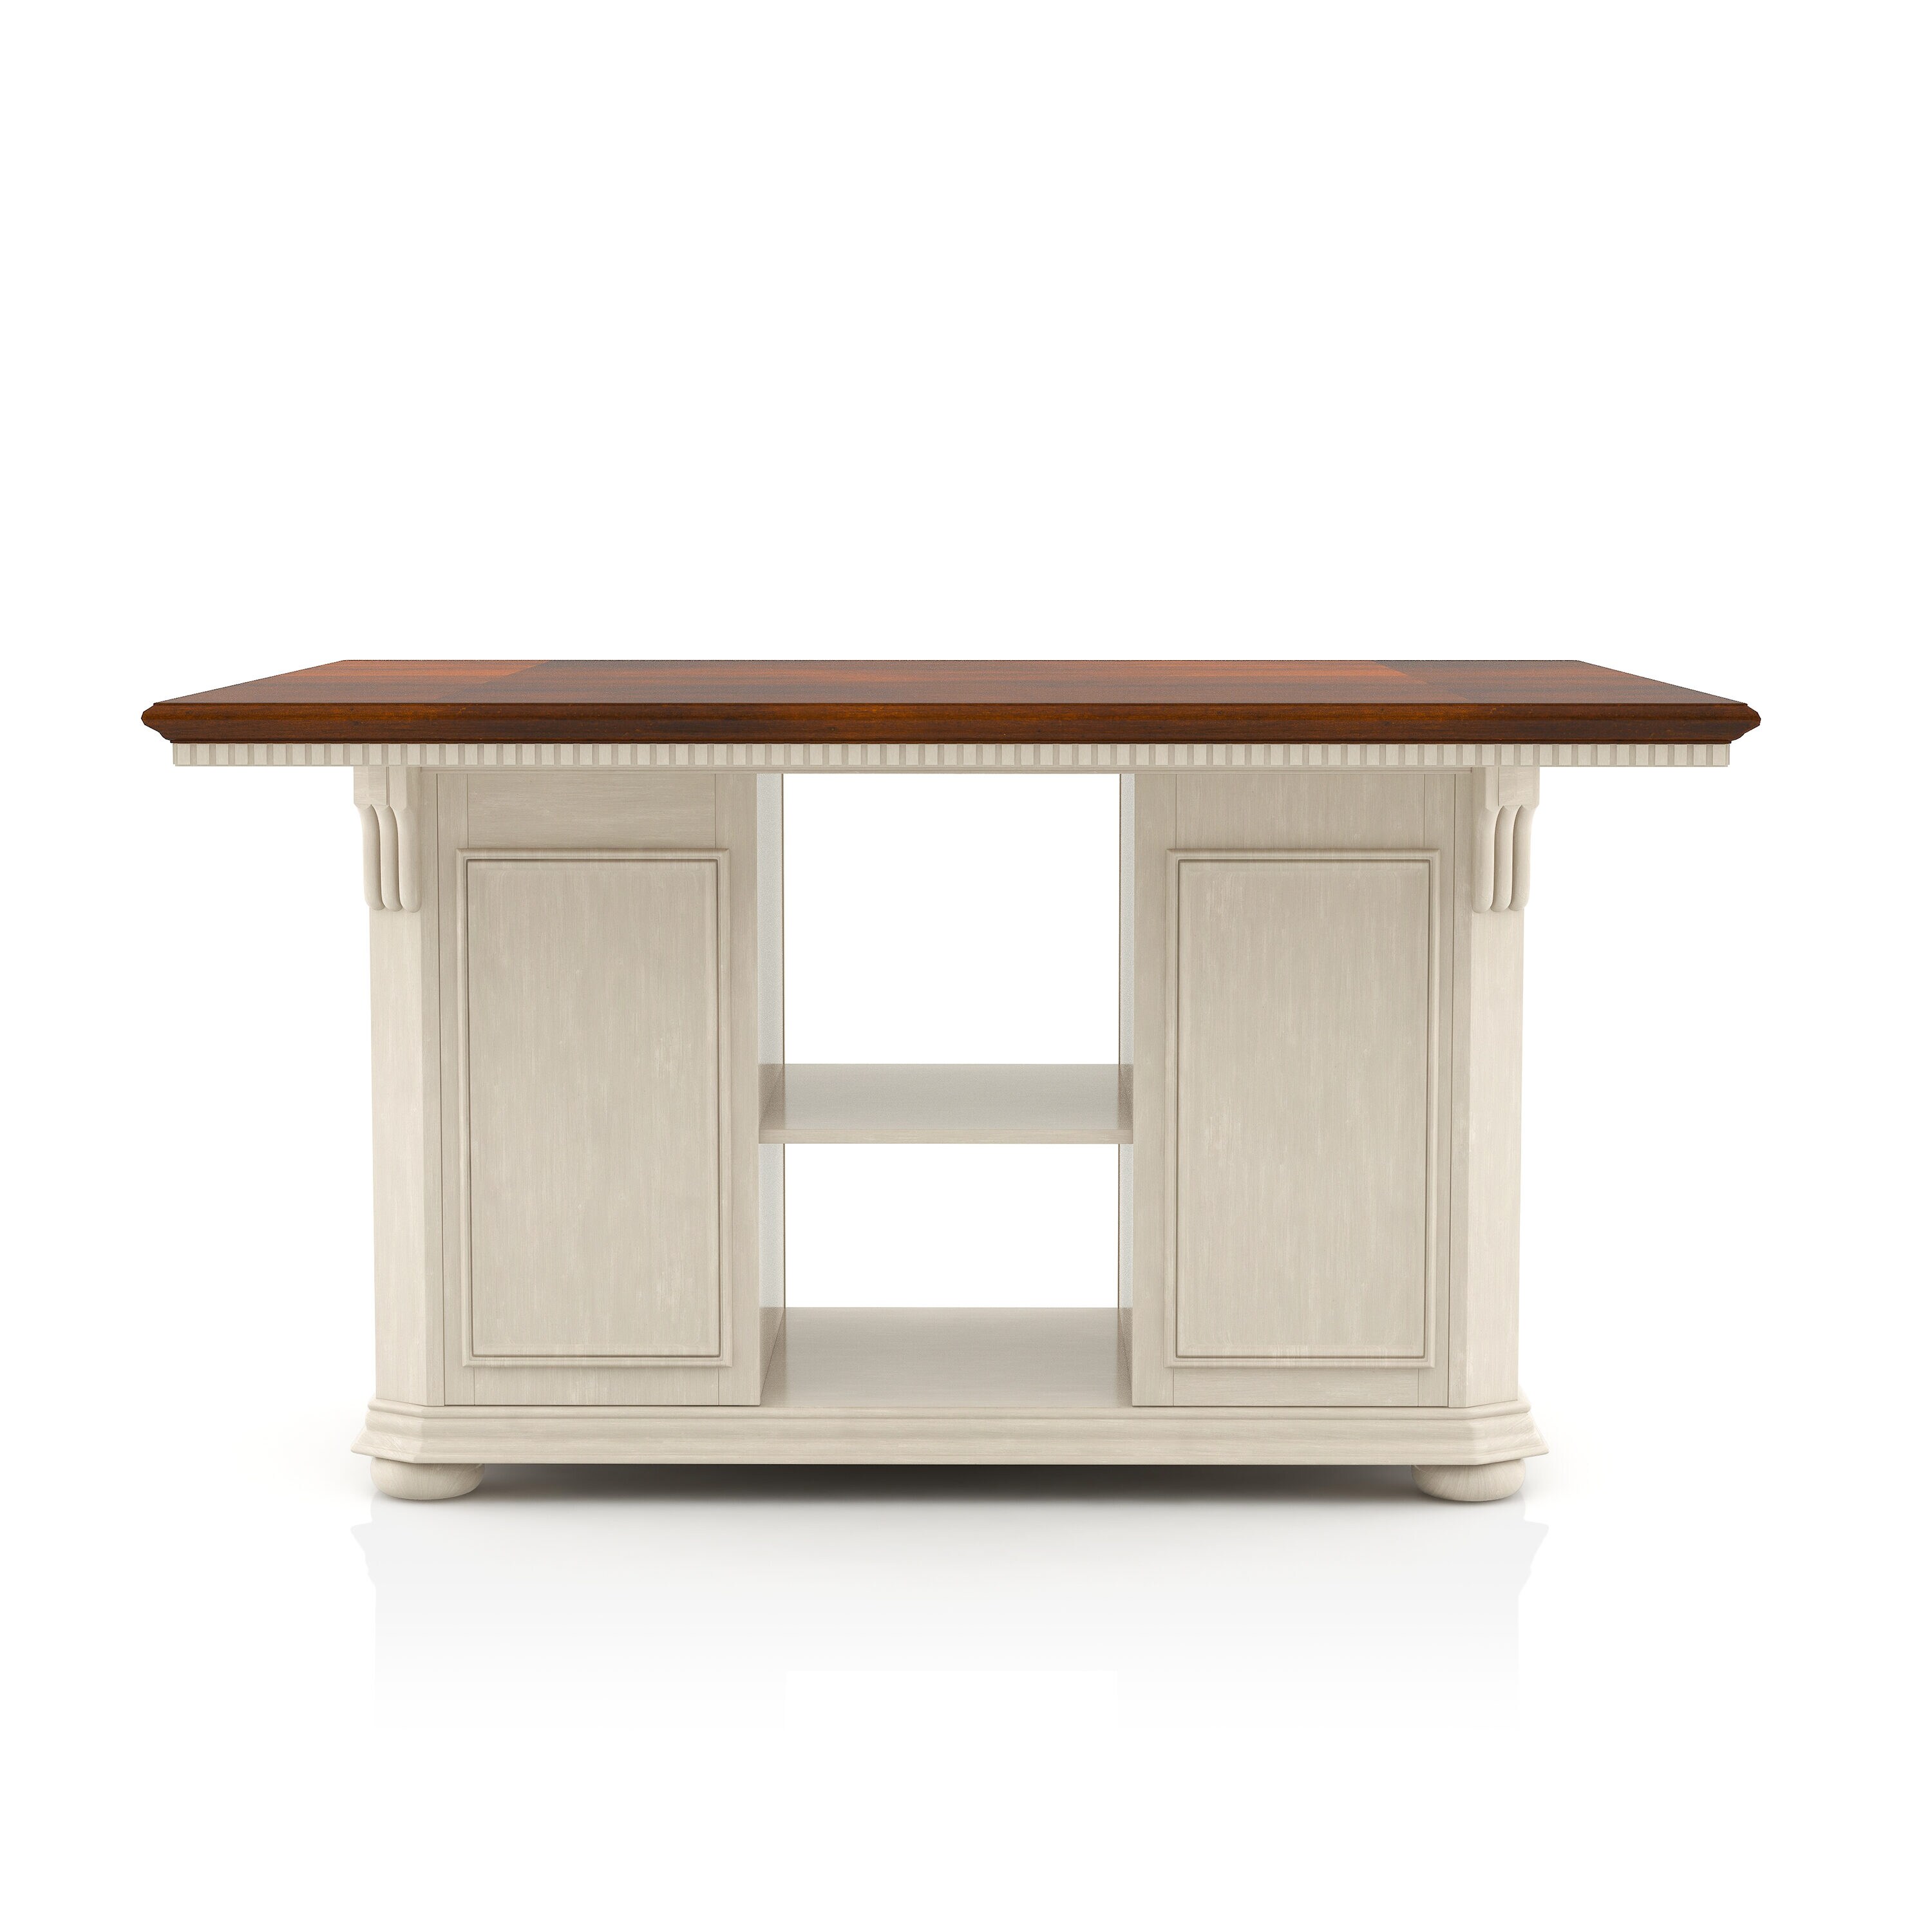 Furniture of America White Wood Base with Wood Top Kitchen Island